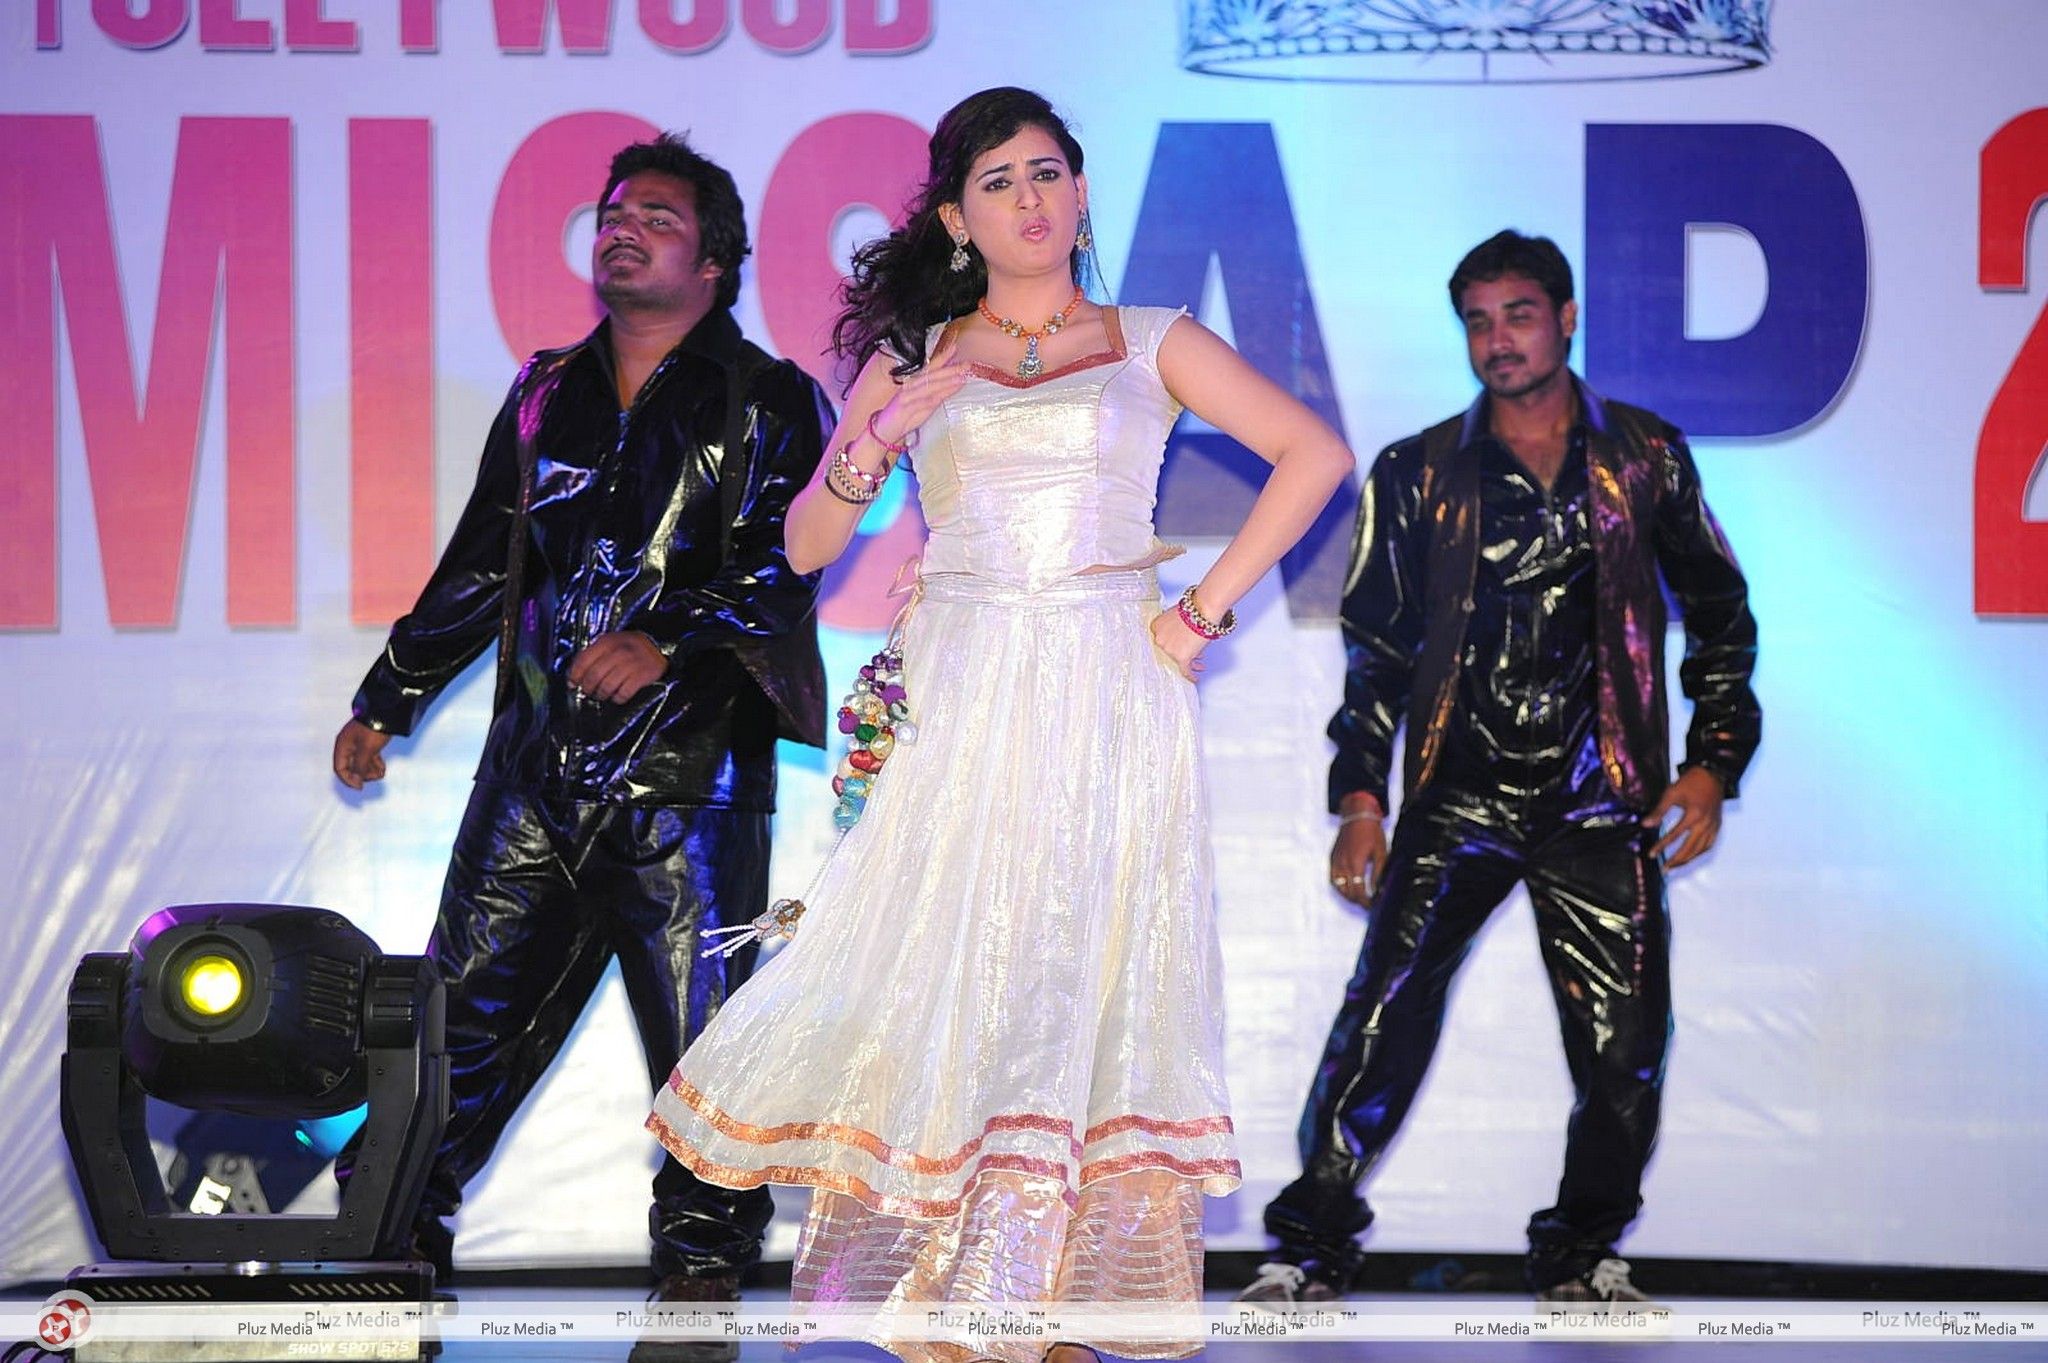 Archana - Tollywood Miss AP 2012 Photos | Picture 348869